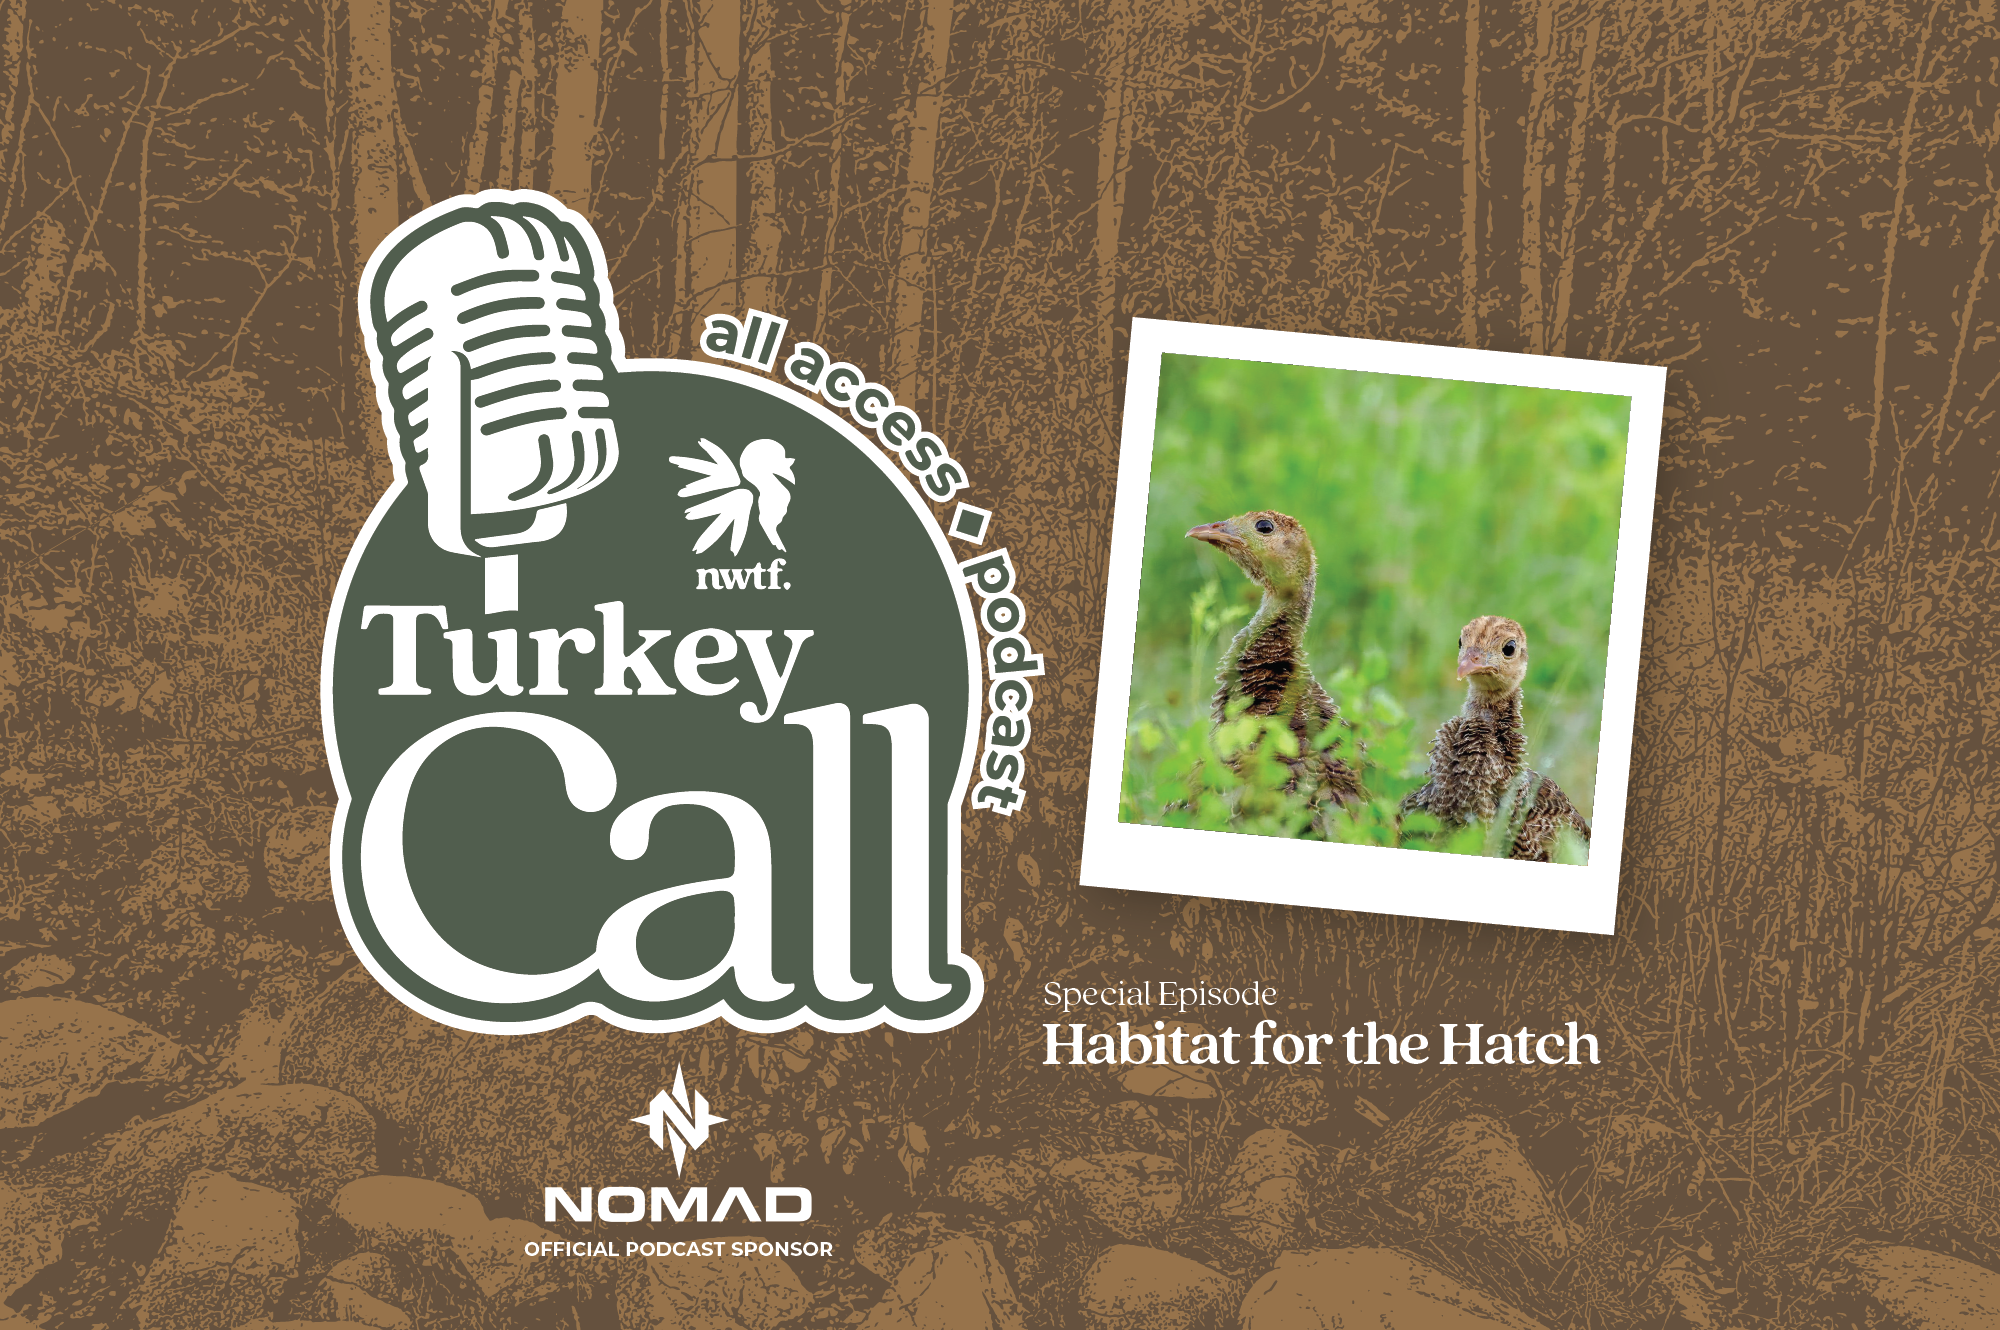 Turkey Call Podcast Header - Listen to the episode below on Habitat for the Hatch